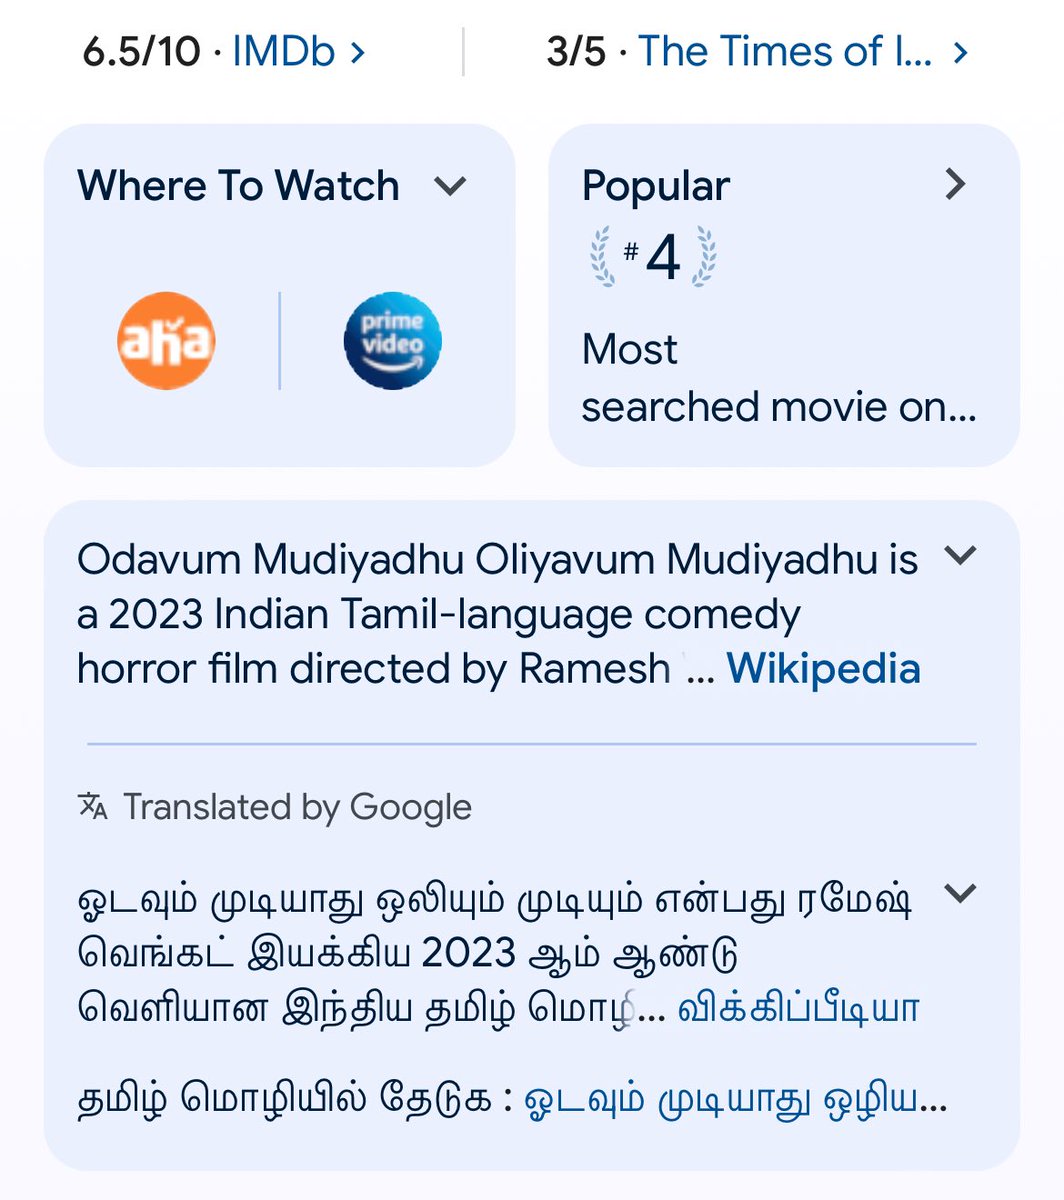 #OMOM is the 2nd most searched term on Google on the basis of recently released movies.we are very much grateful.Thank u everyone for supporting. #OdavumMudiyadhuOliyavumMudiyadhu